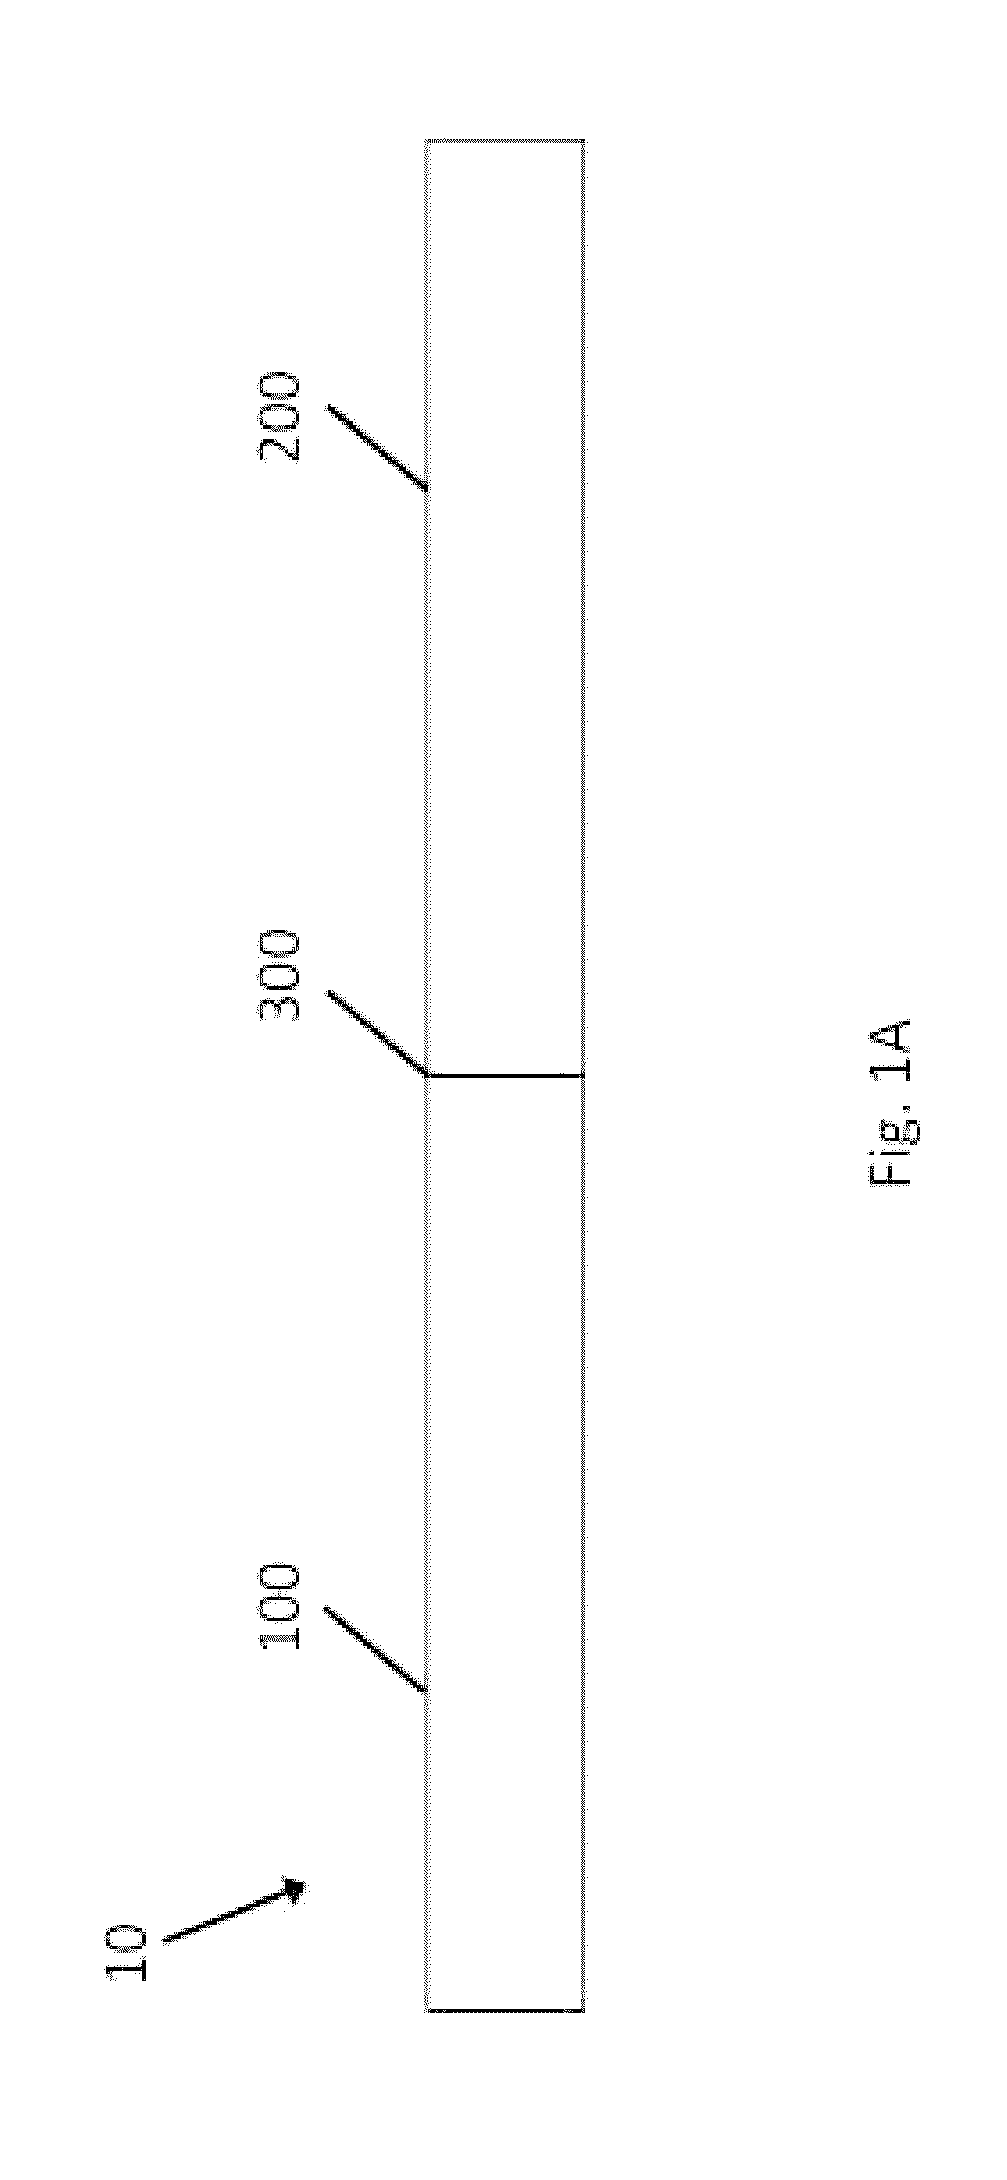 Vascular treatment devices and methods